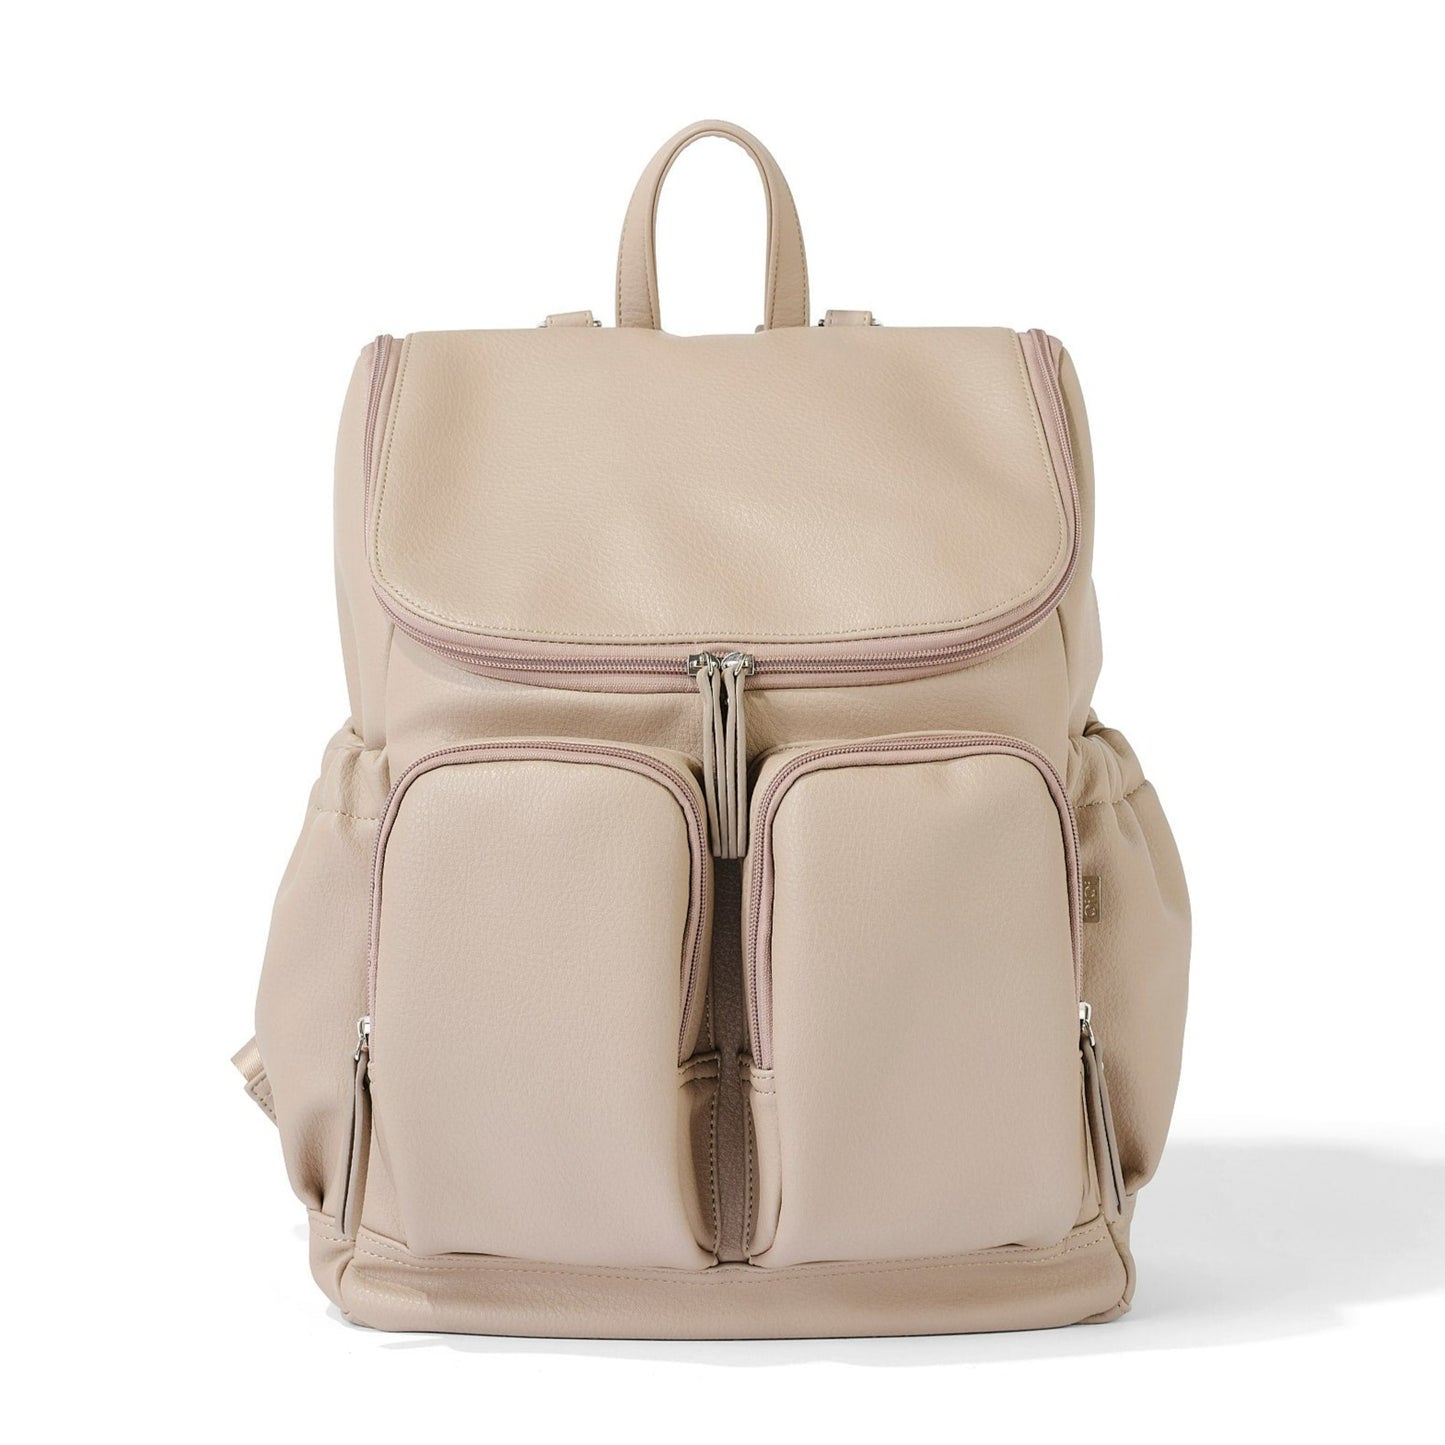 Dimple Faux Leather Diaper Backpack - Oat